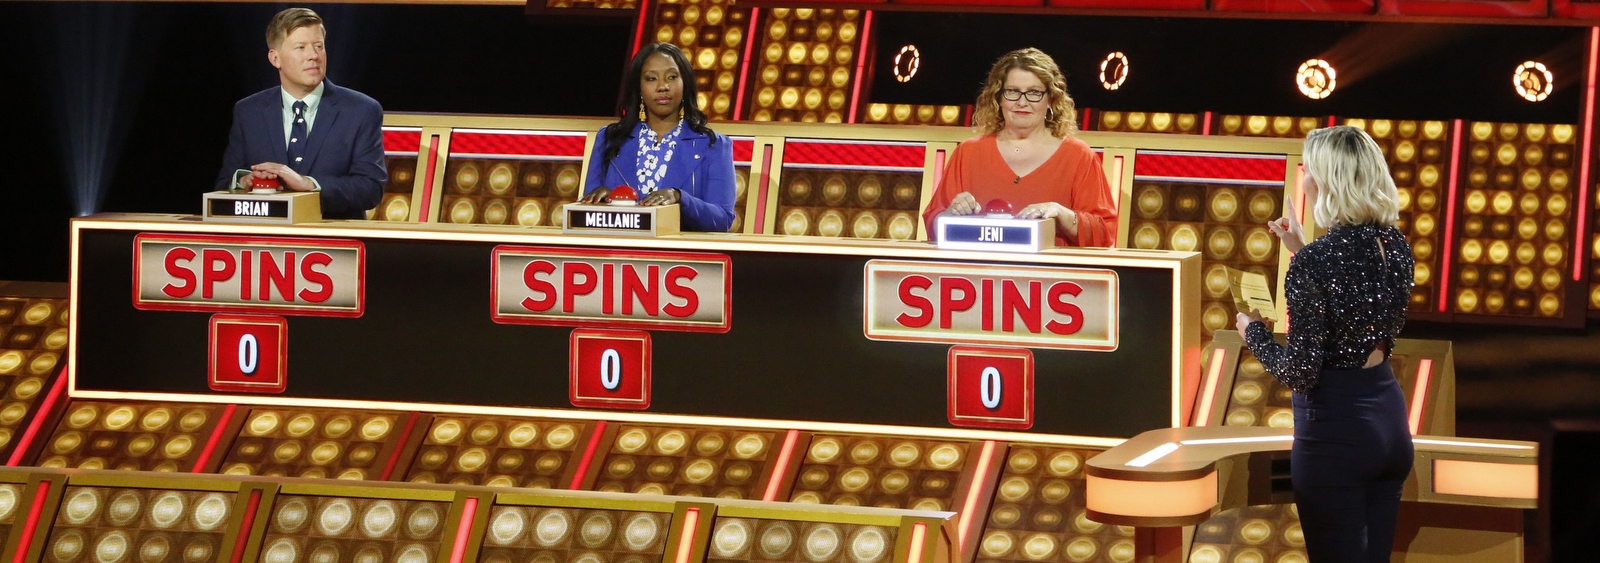 Is Press Your Luck Real or Fake?